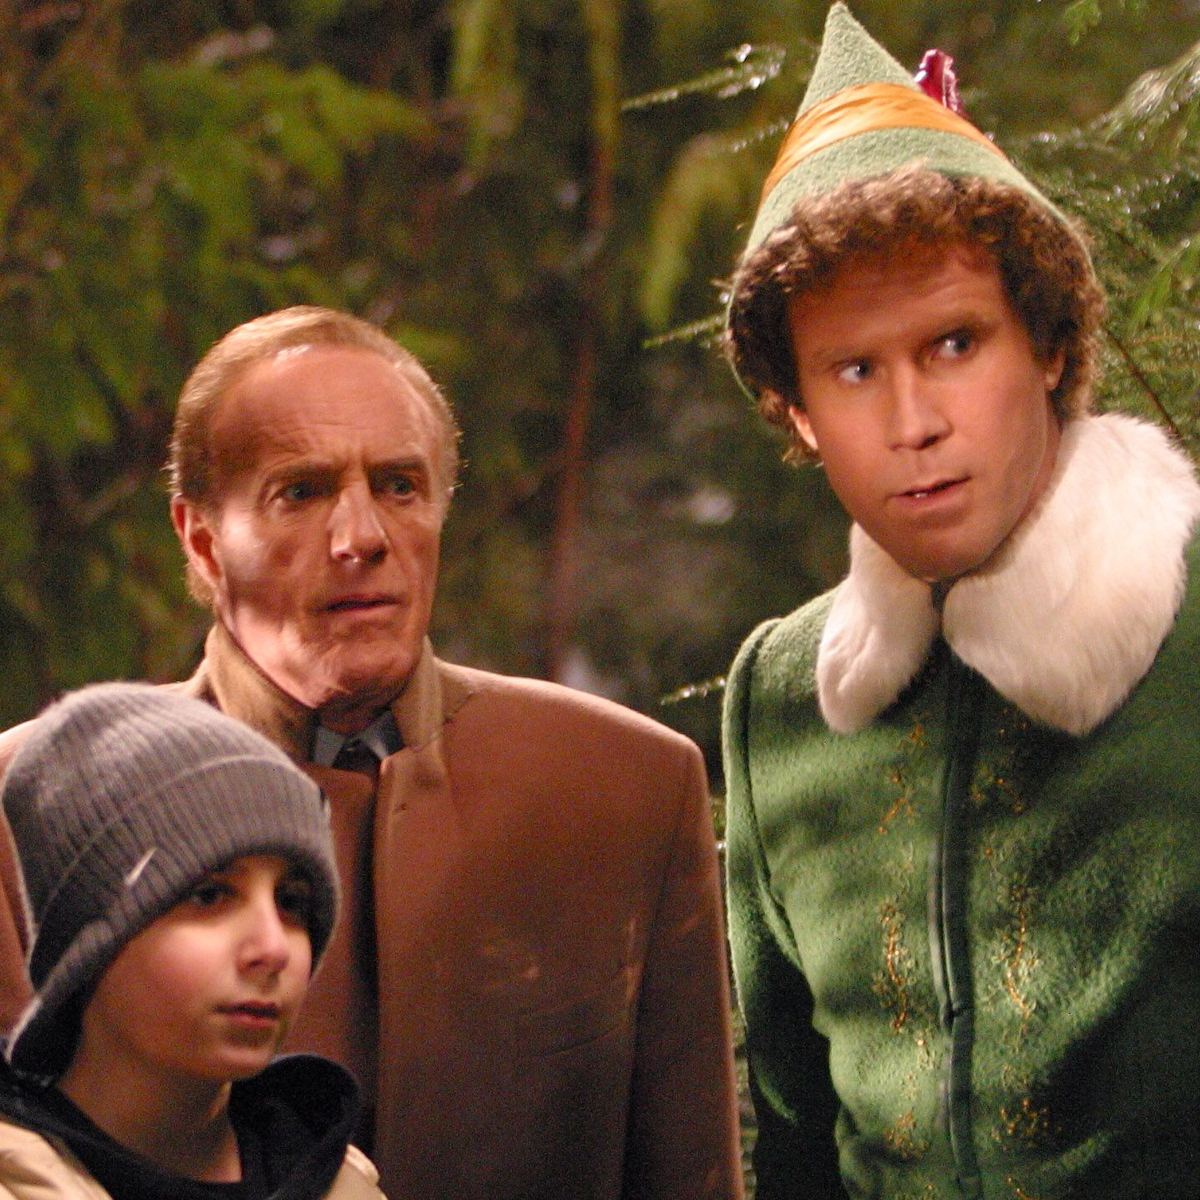 Will Ferrell shares criticism he received from his ‘Elf’ co-star James Caan